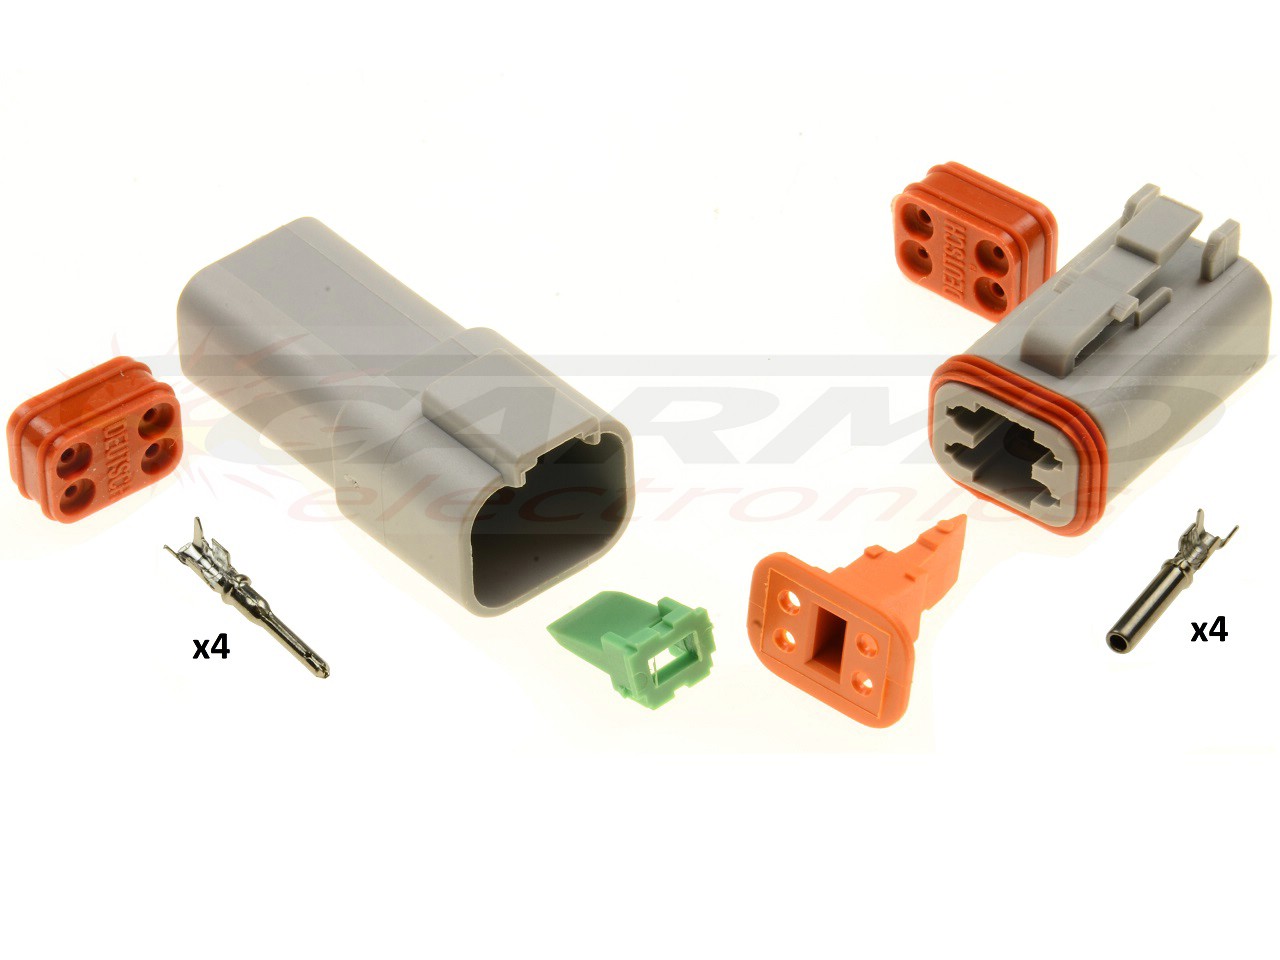 4 pole superseal connector Amphenol - Deutsch DT06-4s DT04-4P - Click Image to Close